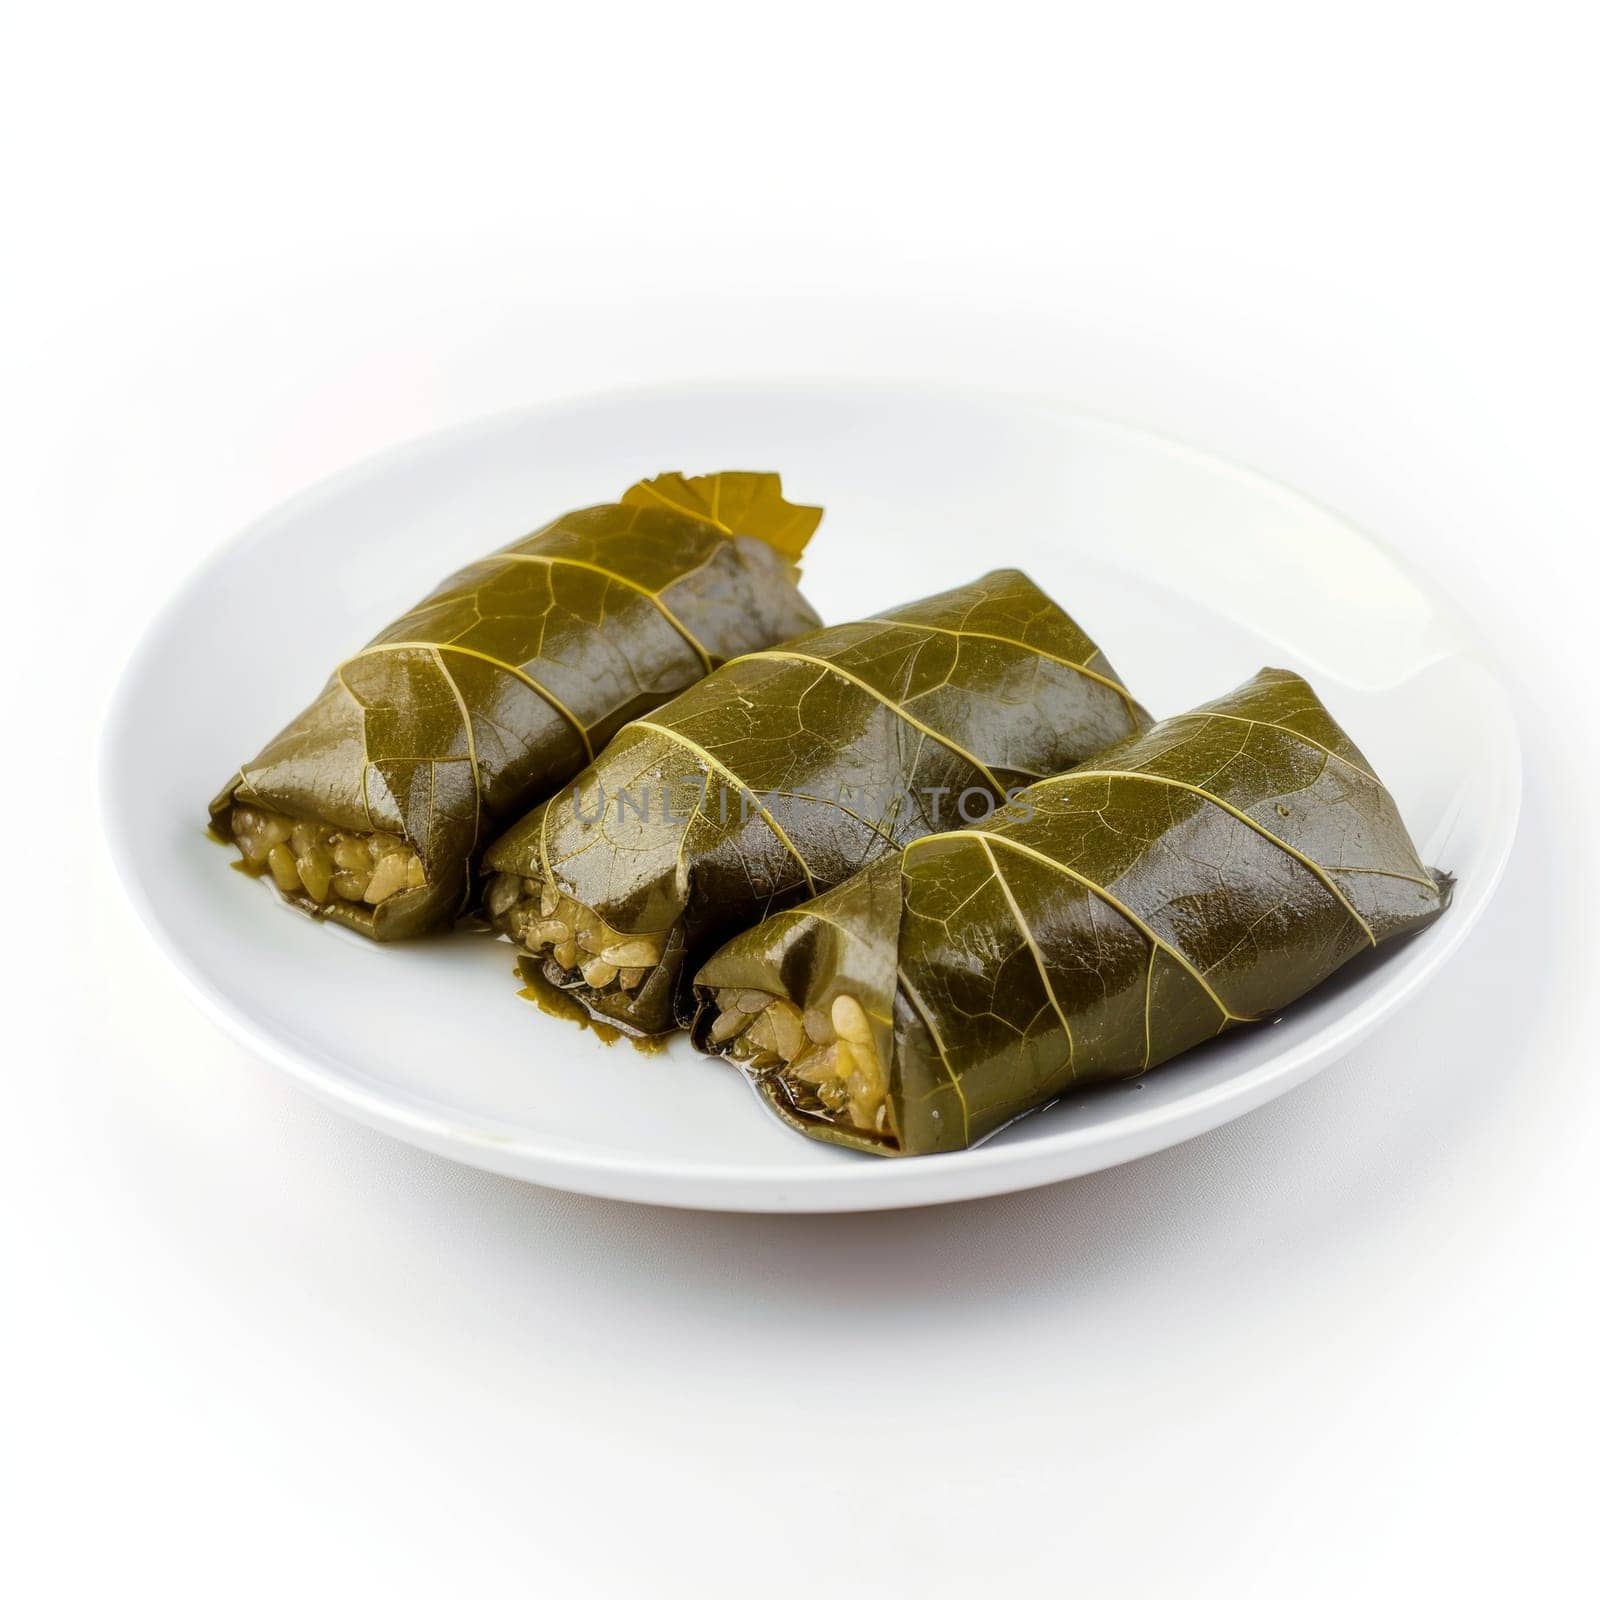 Close up view of Dolma dish on white background.